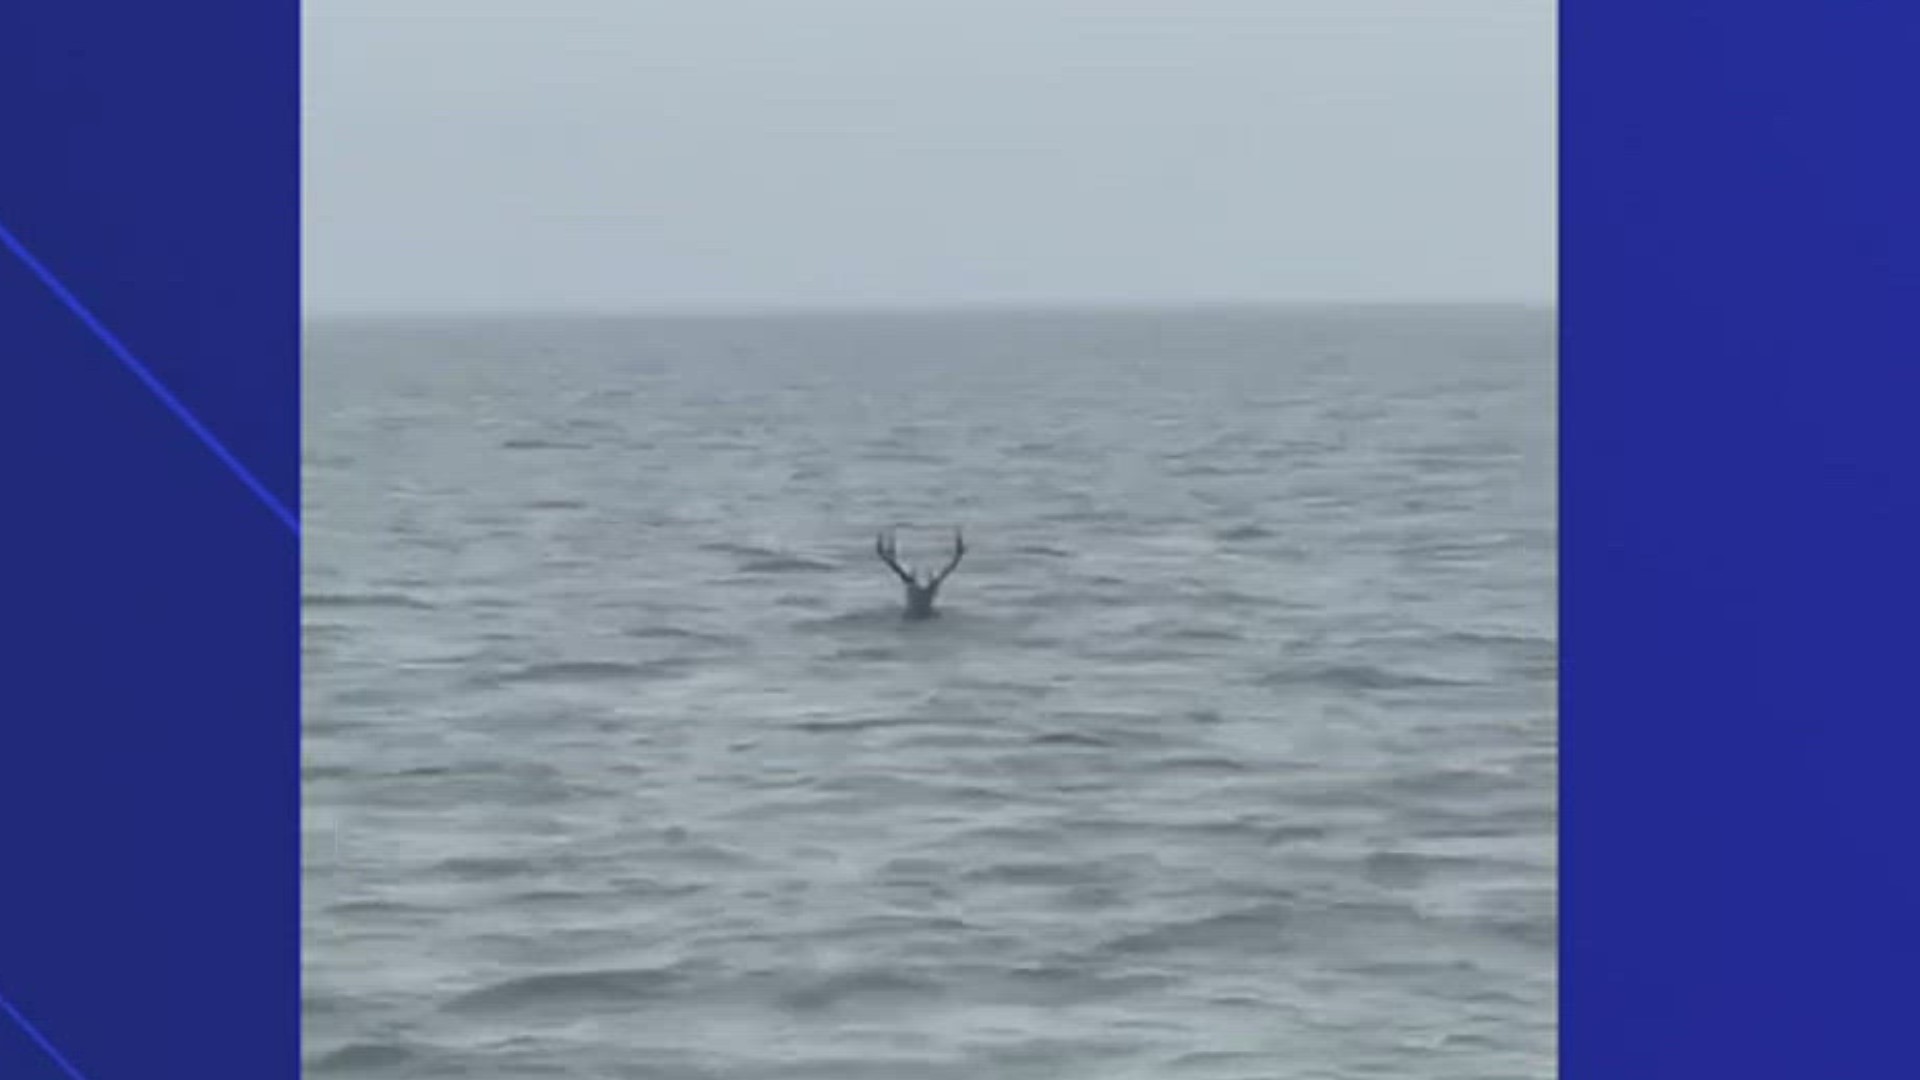 Check this out! A white-tailed buck taking a dip in an area bay- could it be one of Santa's reindeer?